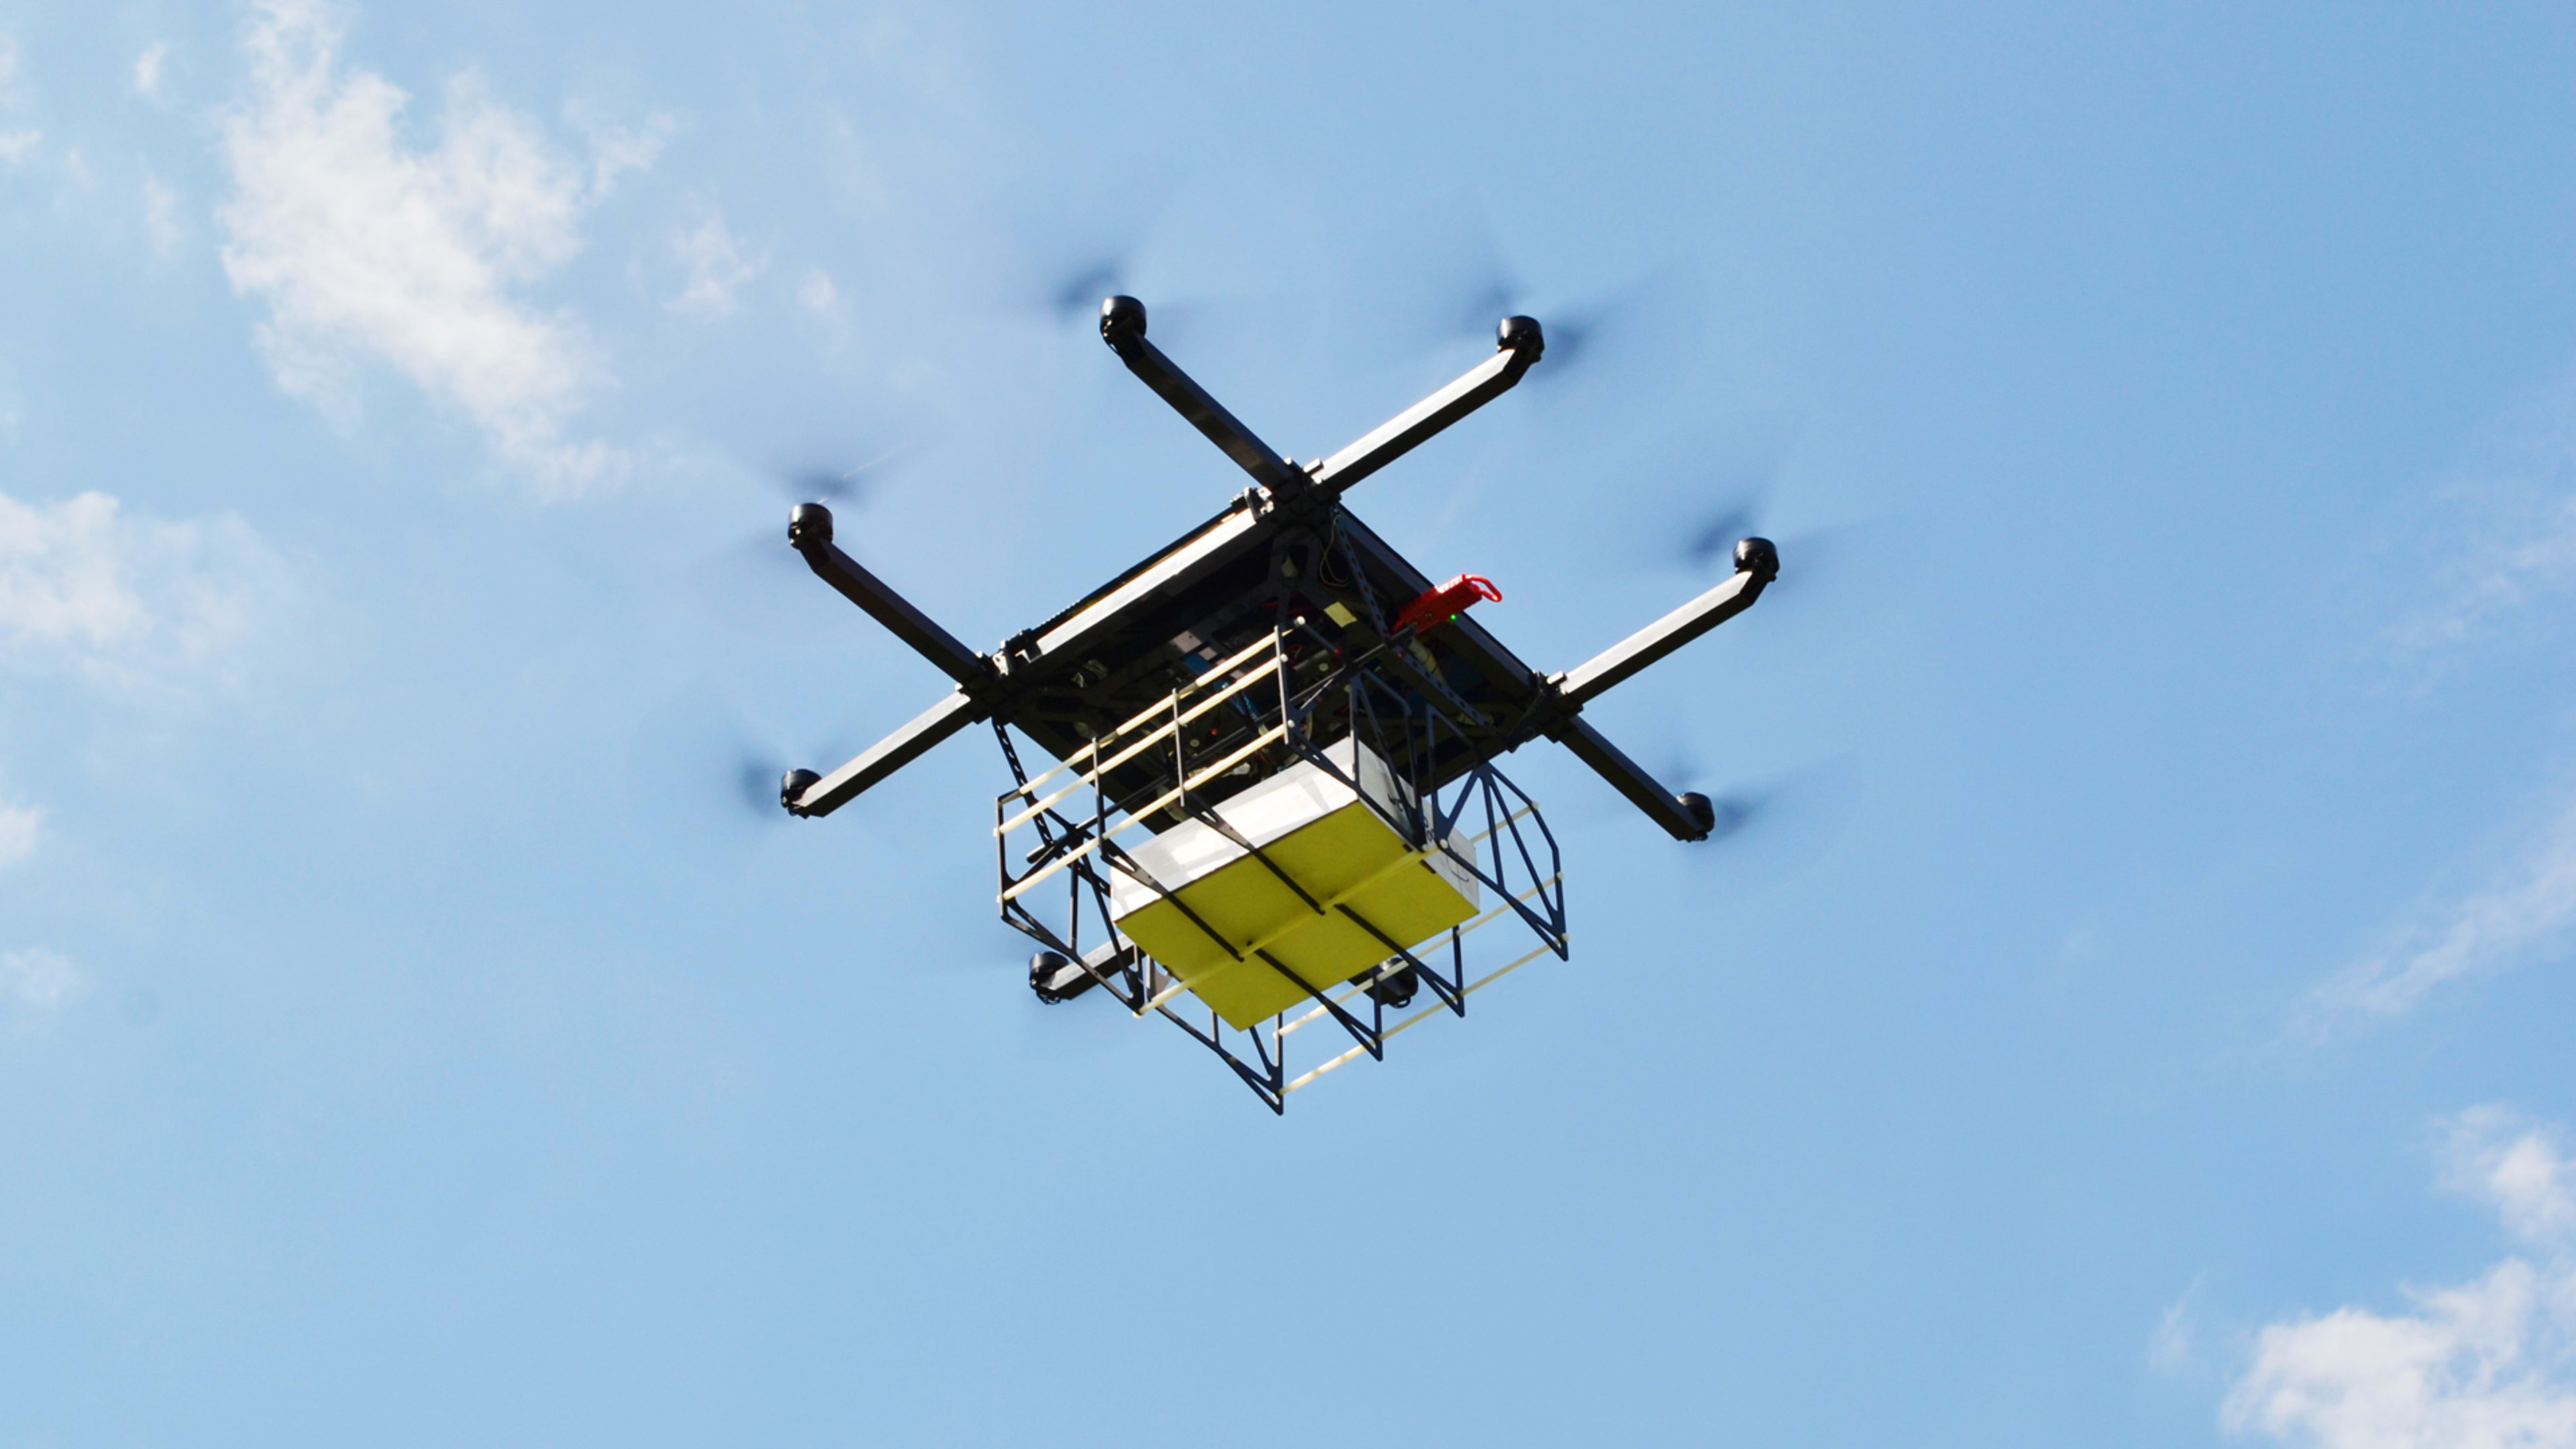 Meet Workhorse, The Company That’s Competing With Amazon For Delivery Drones